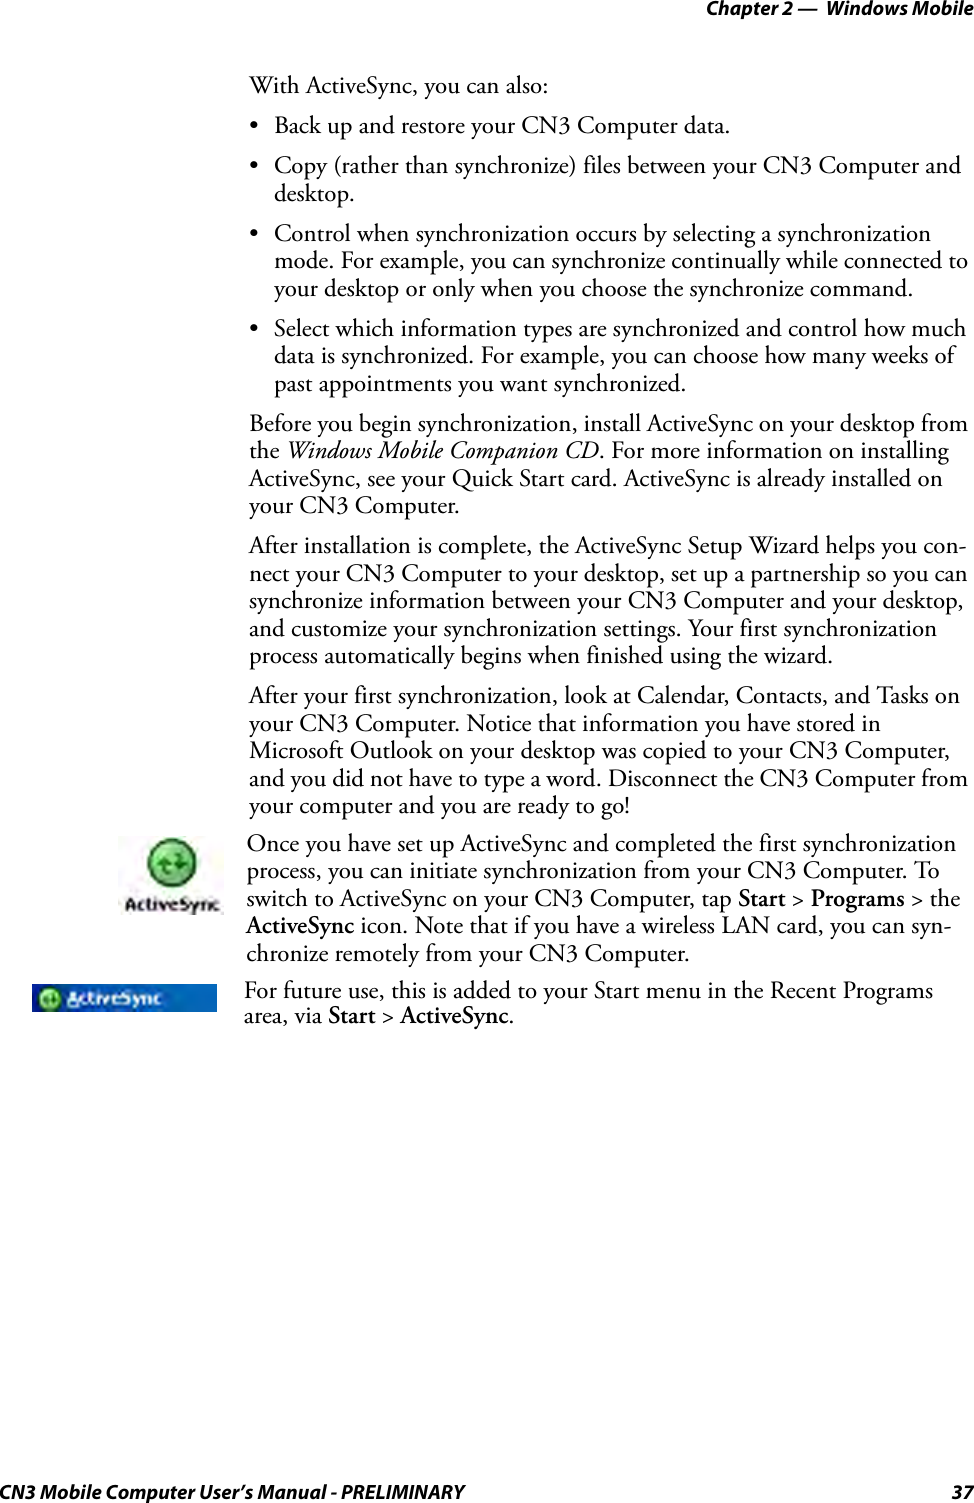 Chapter 2 —  Windows MobileCN3 Mobile Computer User’s Manual - PRELIMINARY 37With ActiveSync, you can also:• Back up and restore your CN3 Computer data.• Copy (rather than synchronize) files between your CN3 Computer and desktop.• Control when synchronization occurs by selecting a synchronization mode. For example, you can synchronize continually while connected to your desktop or only when you choose the synchronize command.• Select which information types are synchronized and control how much data is synchronized. For example, you can choose how many weeks of past appointments you want synchronized.Before you begin synchronization, install ActiveSync on your desktop from the Windows Mobile Companion CD. For more information on installing ActiveSync, see your Quick Start card. ActiveSync is already installed on your CN3 Computer.After installation is complete, the ActiveSync Setup Wizard helps you con-nect your CN3 Computer to your desktop, set up a partnership so you can synchronize information between your CN3 Computer and your desktop, and customize your synchronization settings. Your first synchronization process automatically begins when finished using the wizard.After your first synchronization, look at Calendar, Contacts, and Tasks on your CN3 Computer. Notice that information you have stored in Microsoft Outlook on your desktop was copied to your CN3 Computer, and you did not have to type a word. Disconnect the CN3 Computer from your computer and you are ready to go!Once you have set up ActiveSync and completed the first synchronization process, you can initiate synchronization from your CN3 Computer. To switch to ActiveSync on your CN3 Computer, tap Start &gt; Programs &gt; the ActiveSync icon. Note that if you have a wireless LAN card, you can syn-chronize remotely from your CN3 Computer.For future use, this is added to your Start menu in the Recent Programs area, via Start &gt; ActiveSync.